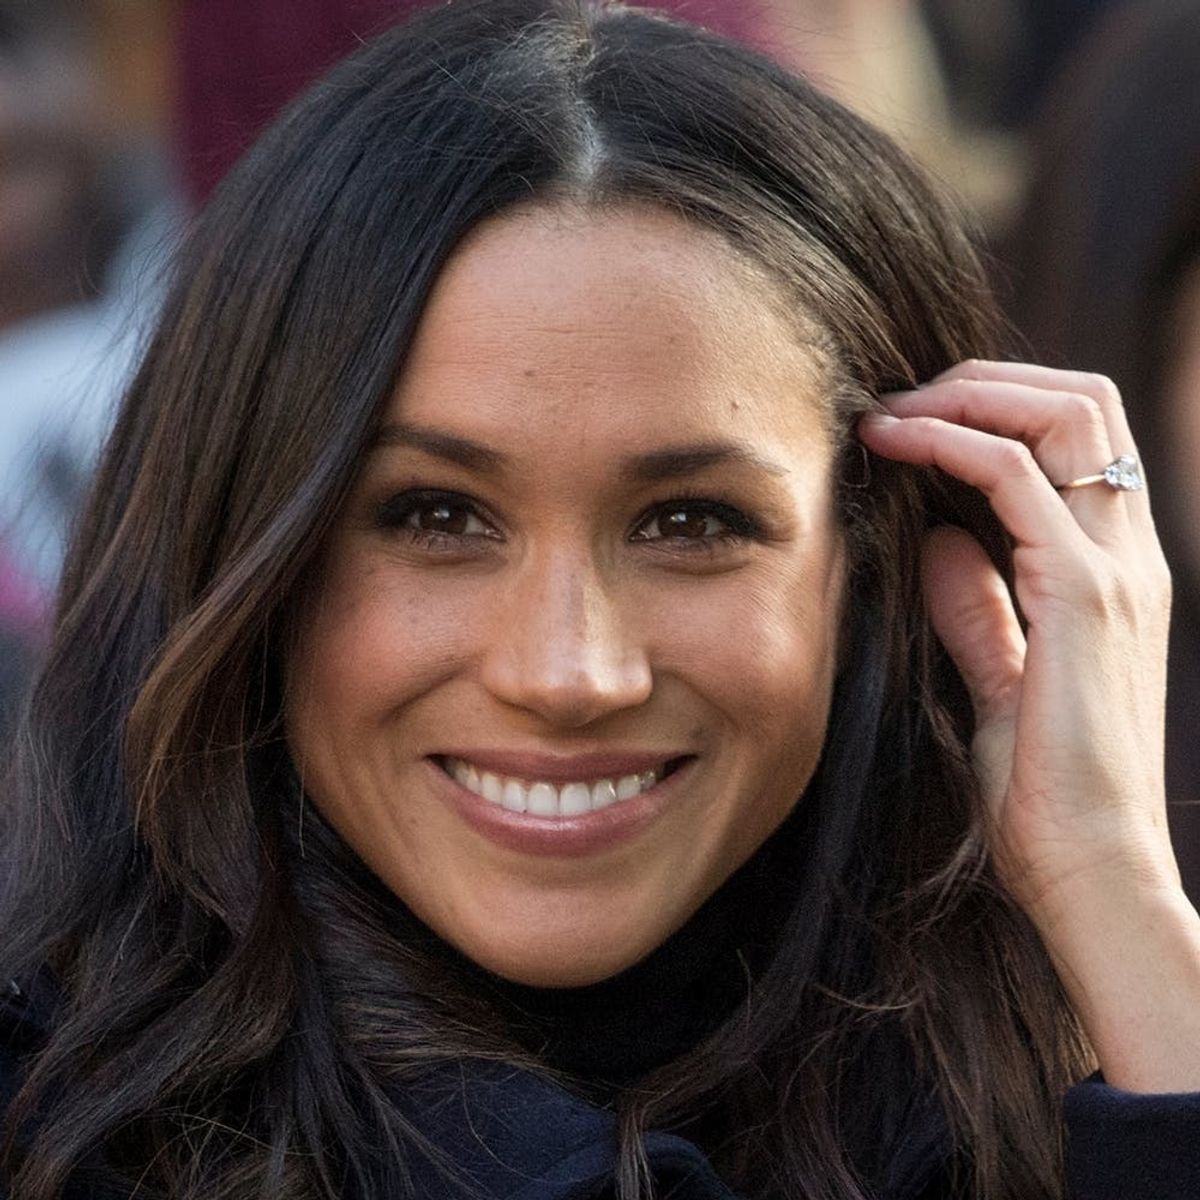 These Are the Workouts Getting Meghan Markle into Royal Shape